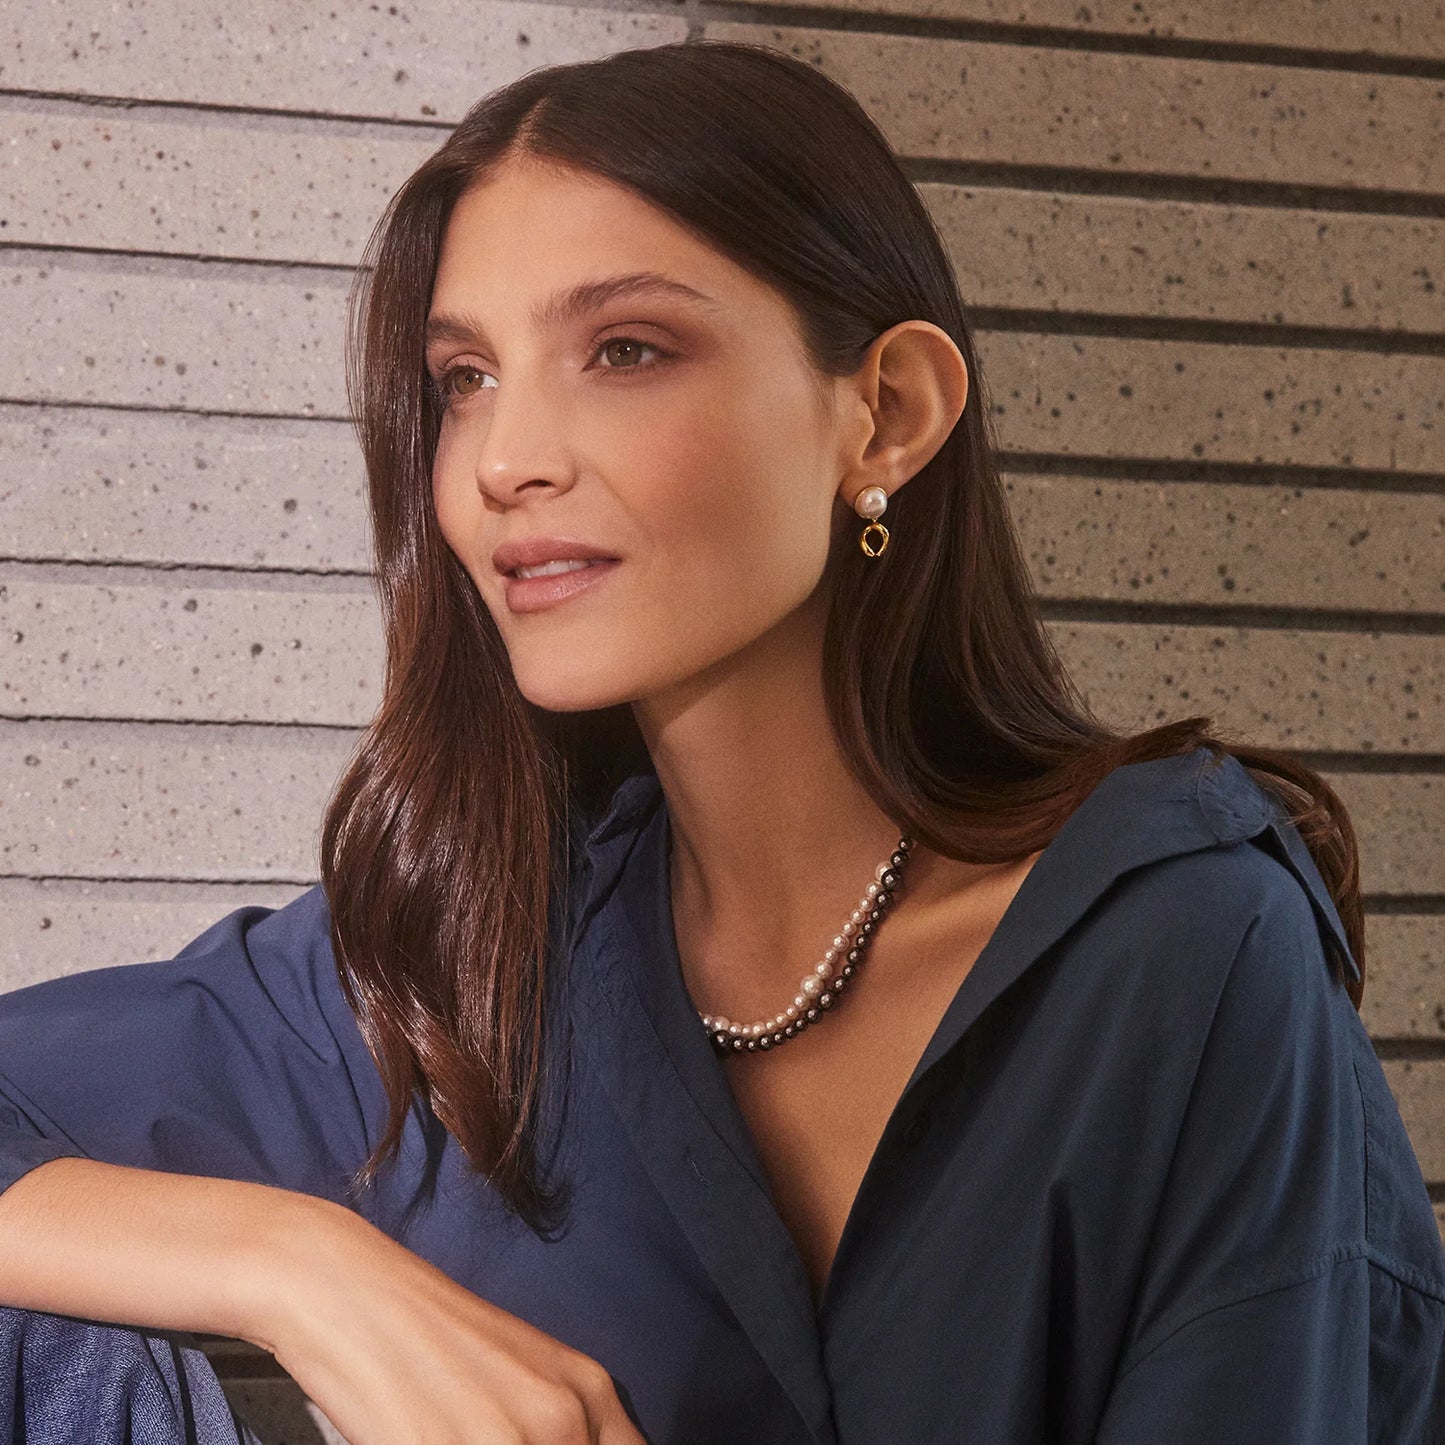 The Lou Pearl earrings are a classic accessory with modern appeal. Crafted from 18k gold plated brass with a white shell pearl, these earrings are designed by California-based designer Gorjana for a timeless look. Perfect for any occasion.